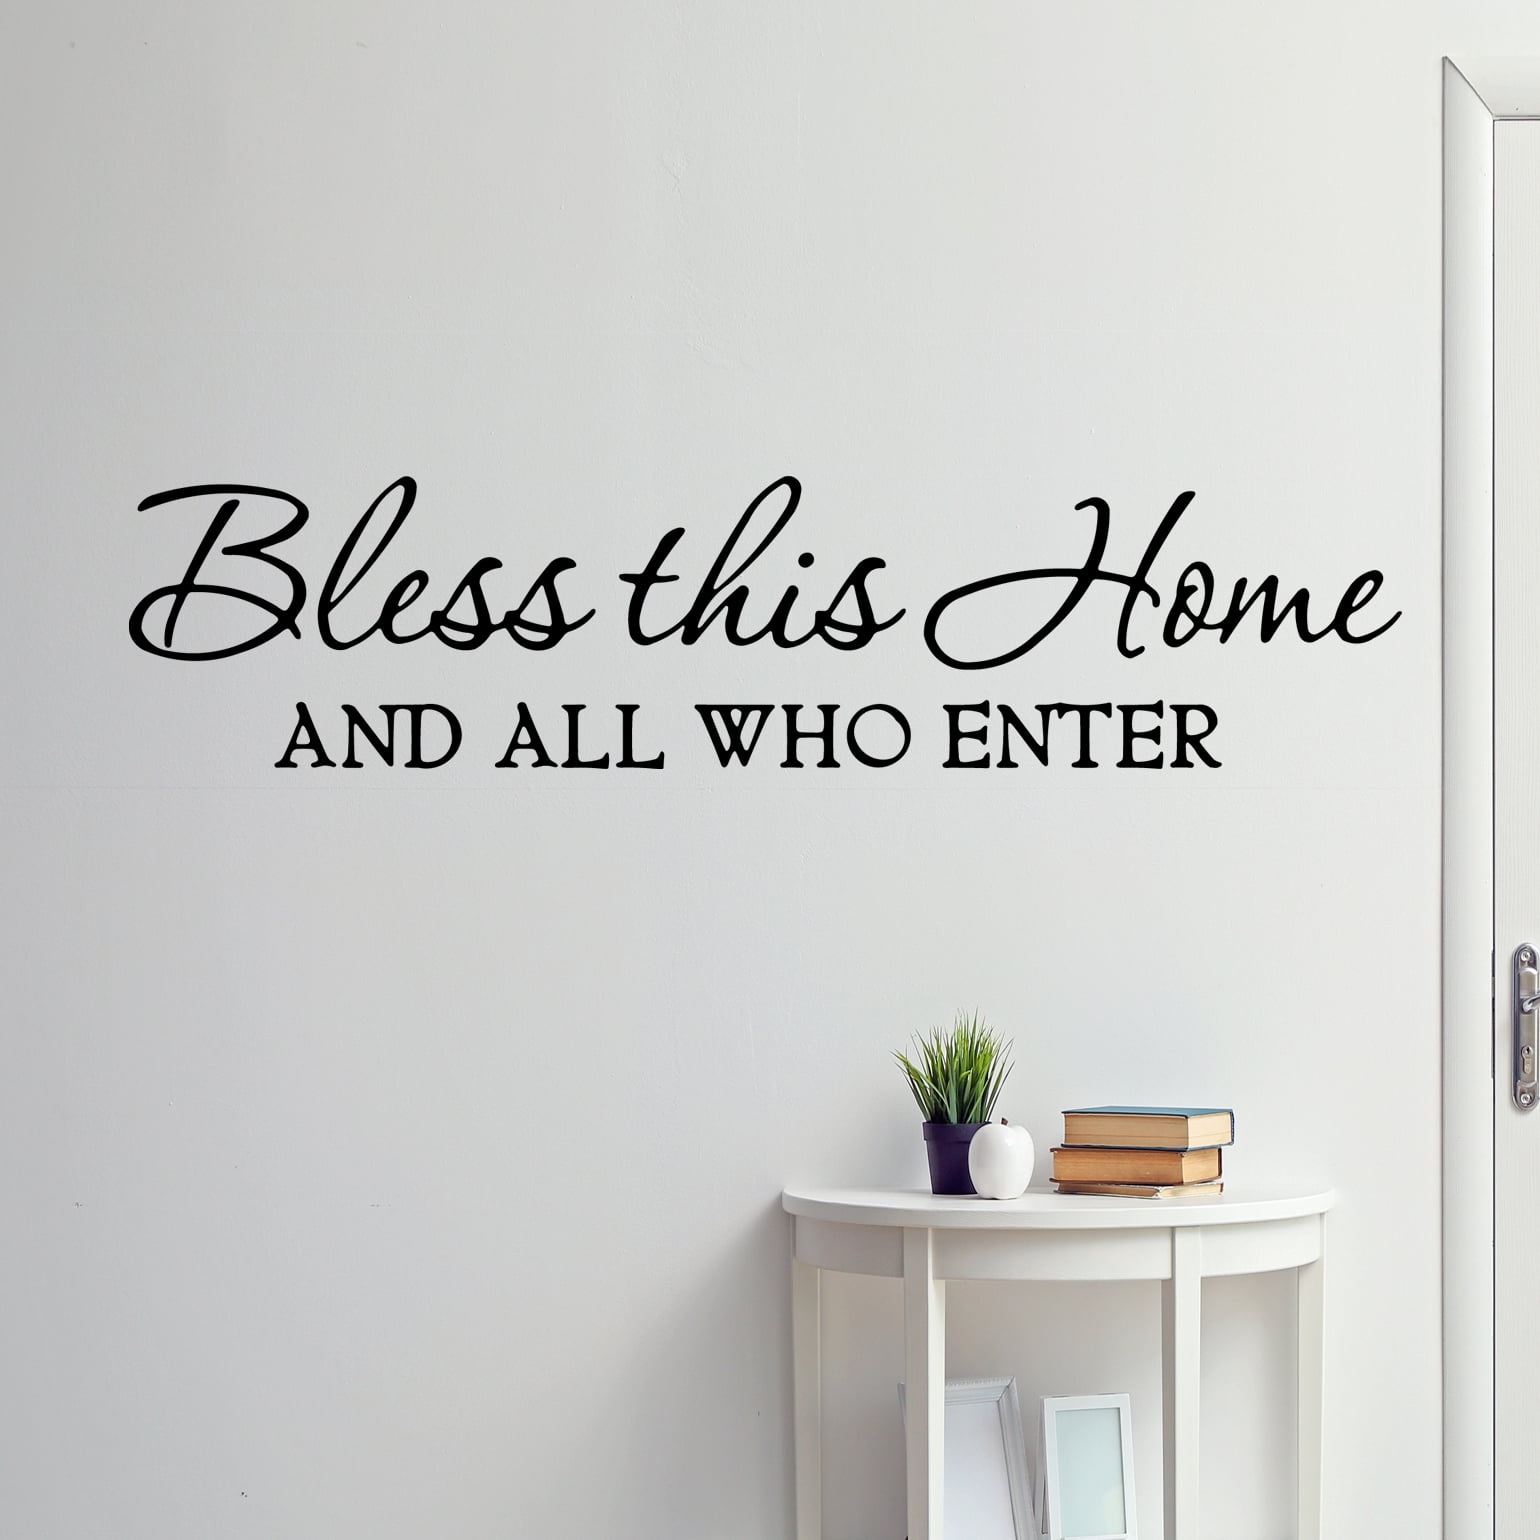 Bless this Home Friend Vinyl Wall Home Decor Decal Quote Inspirational Adorable